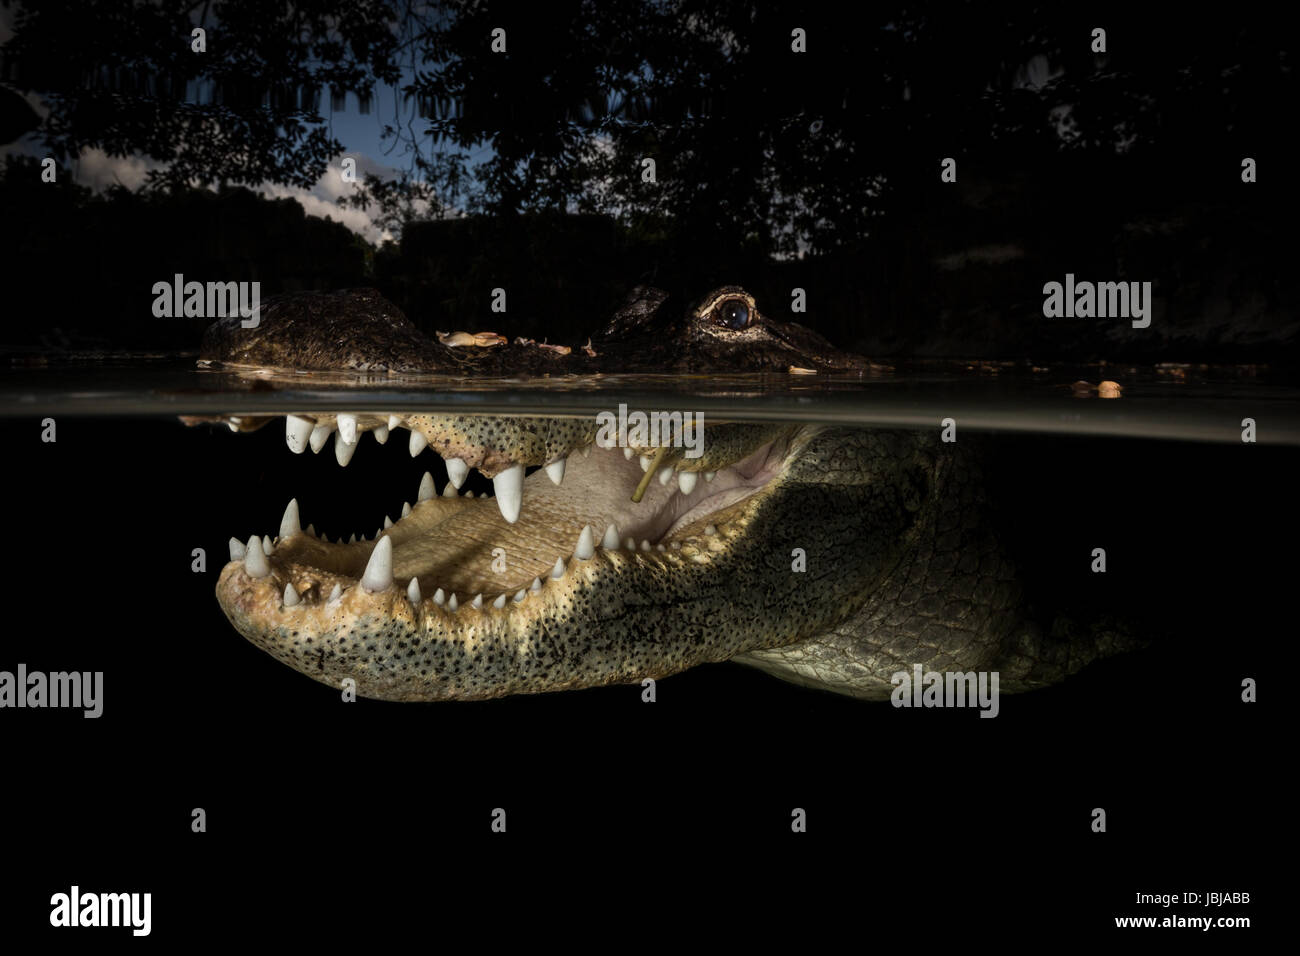 over under photo of an american alligator with its mouth open Stock Photo